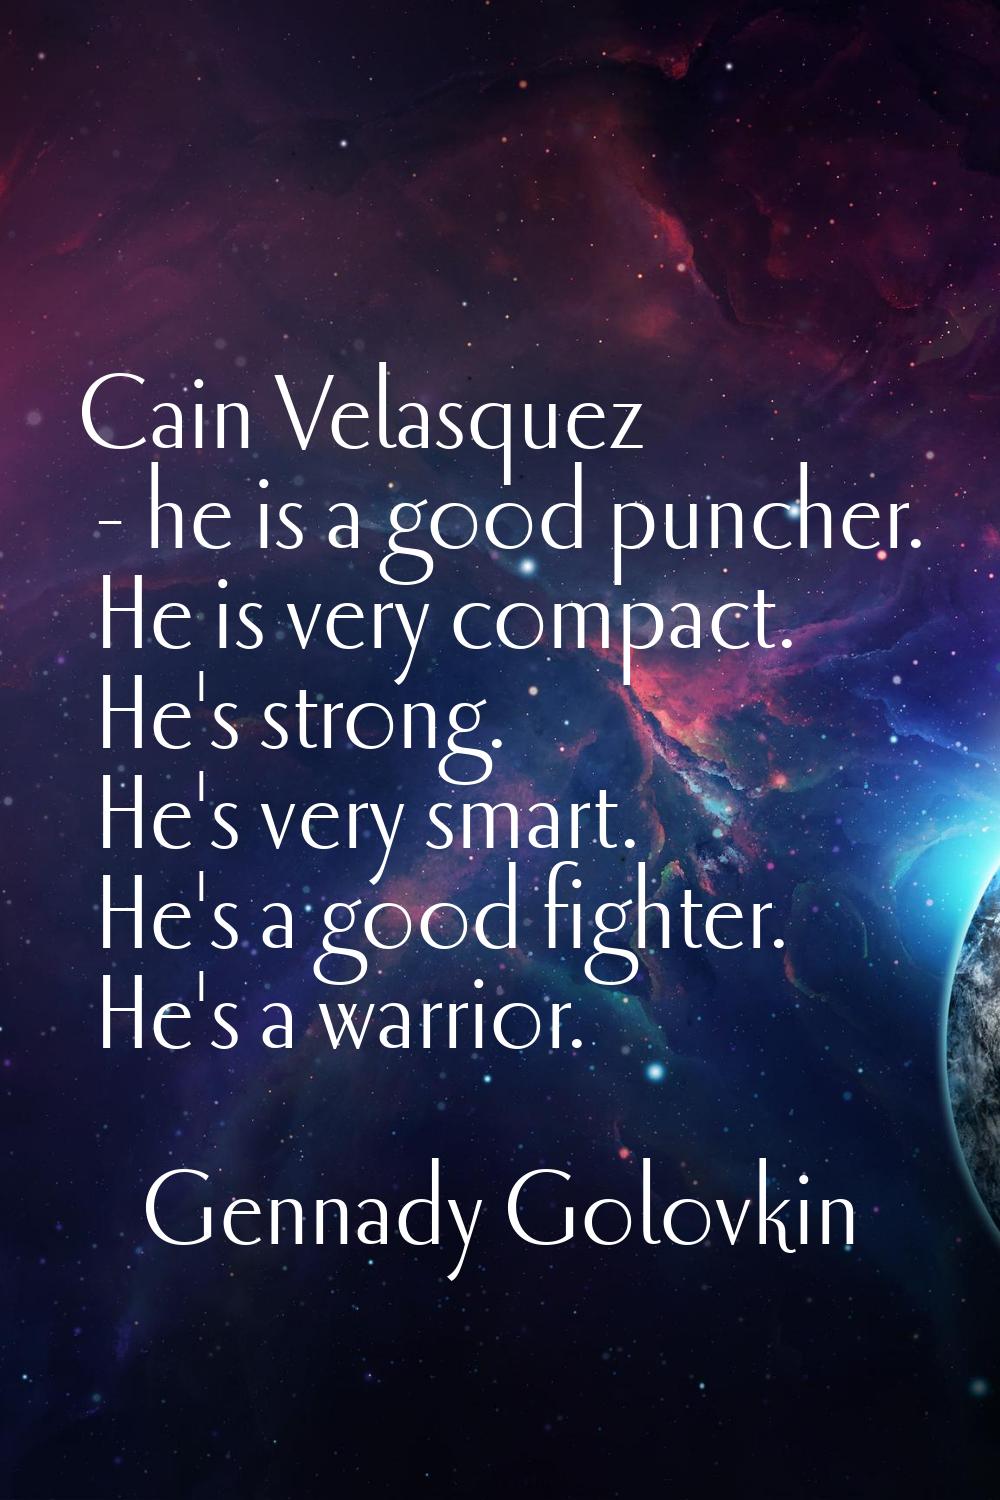 Cain Velasquez - he is a good puncher. He is very compact. He's strong. He's very smart. He's a goo